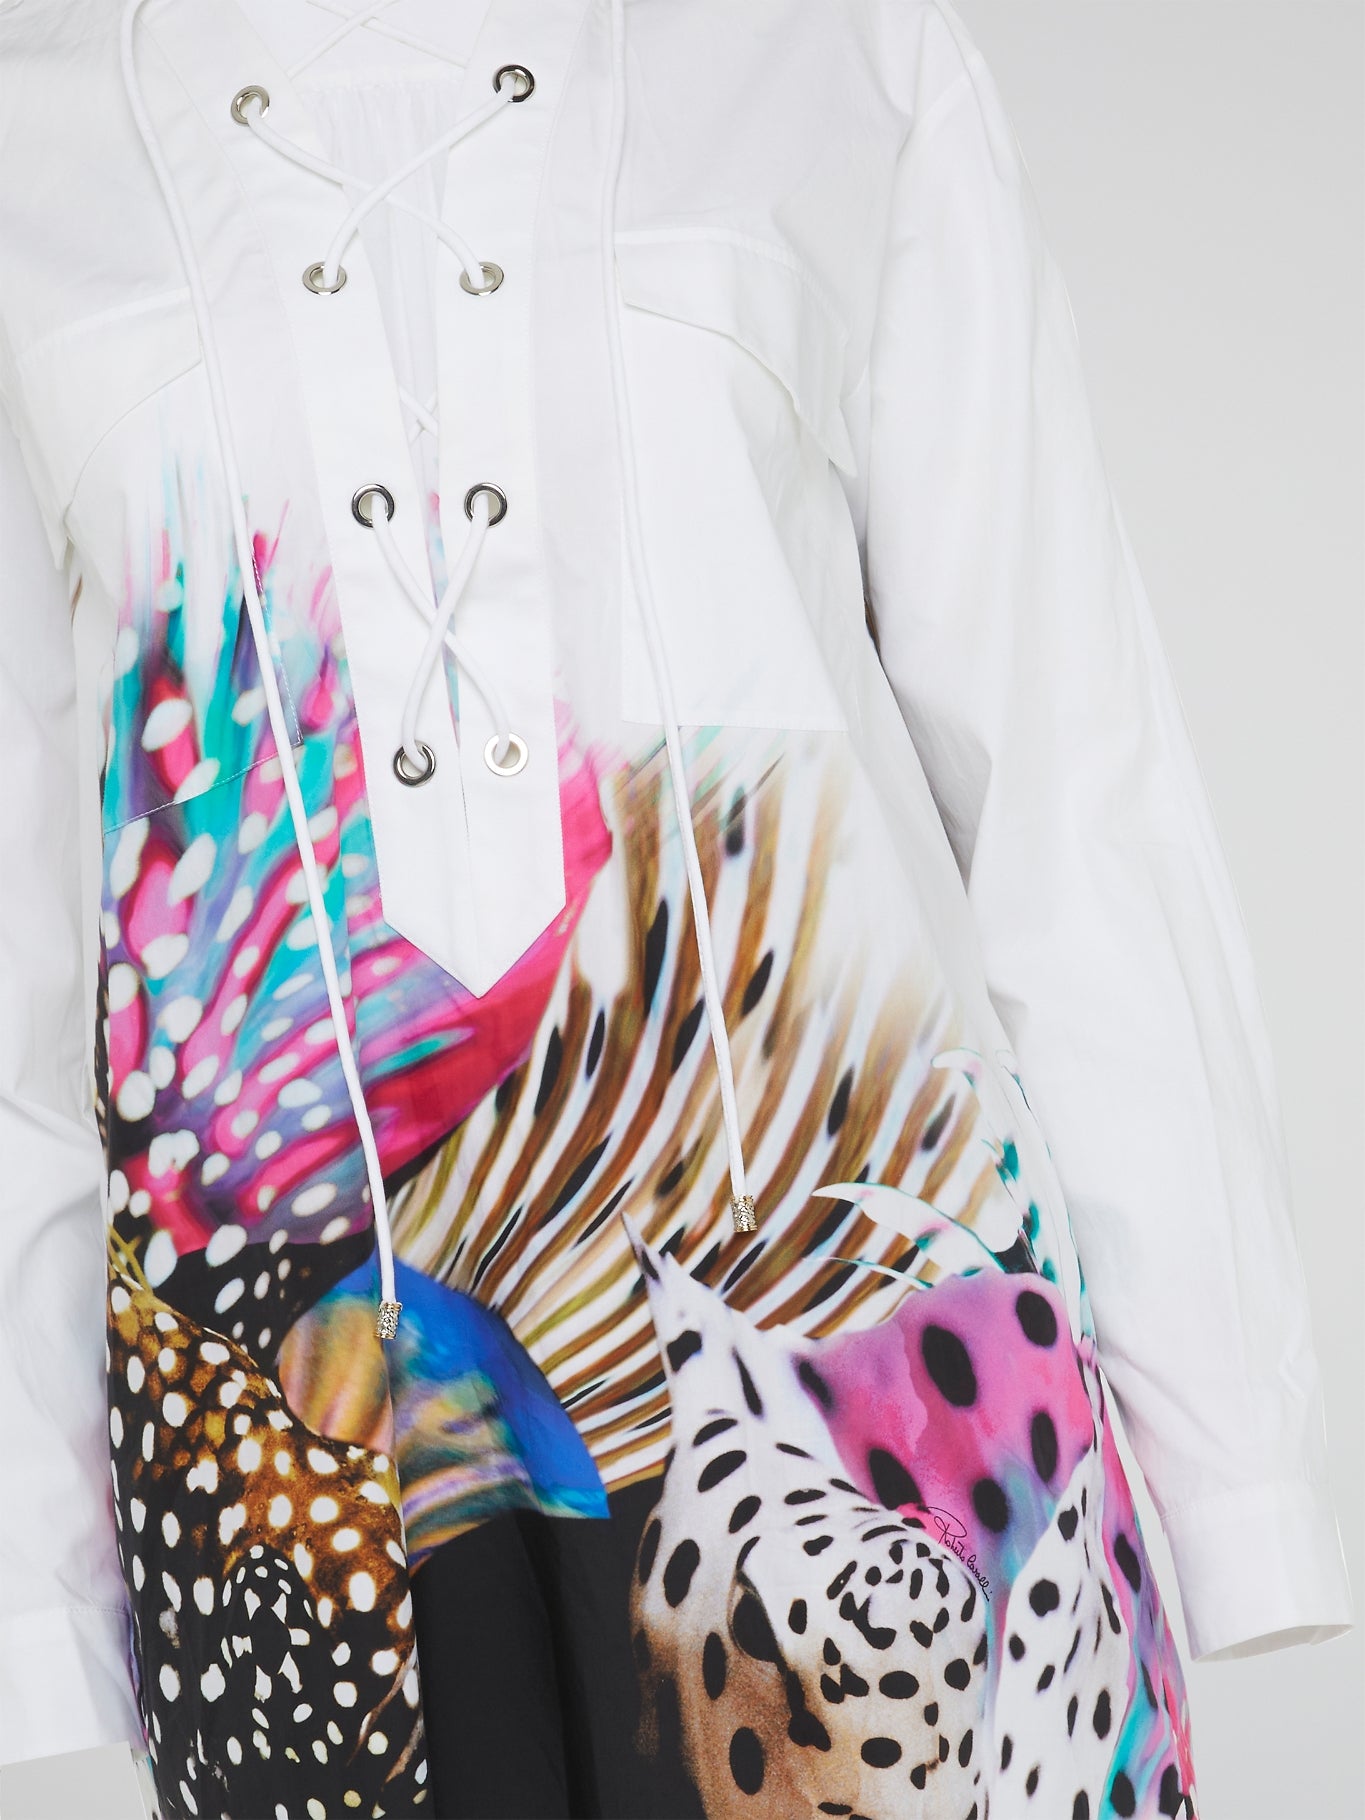 Elevate your wardrobe with the Abstract Print Lace Up Blouse from Roberto Cavalli - a bold and unique piece that exudes confidence and style. Featuring a stunning abstract print and eye-catching lace-up detailing, this blouse is sure to turn heads wherever you go. Make a statement and stand out from the crowd with this must-have addition to your closet.